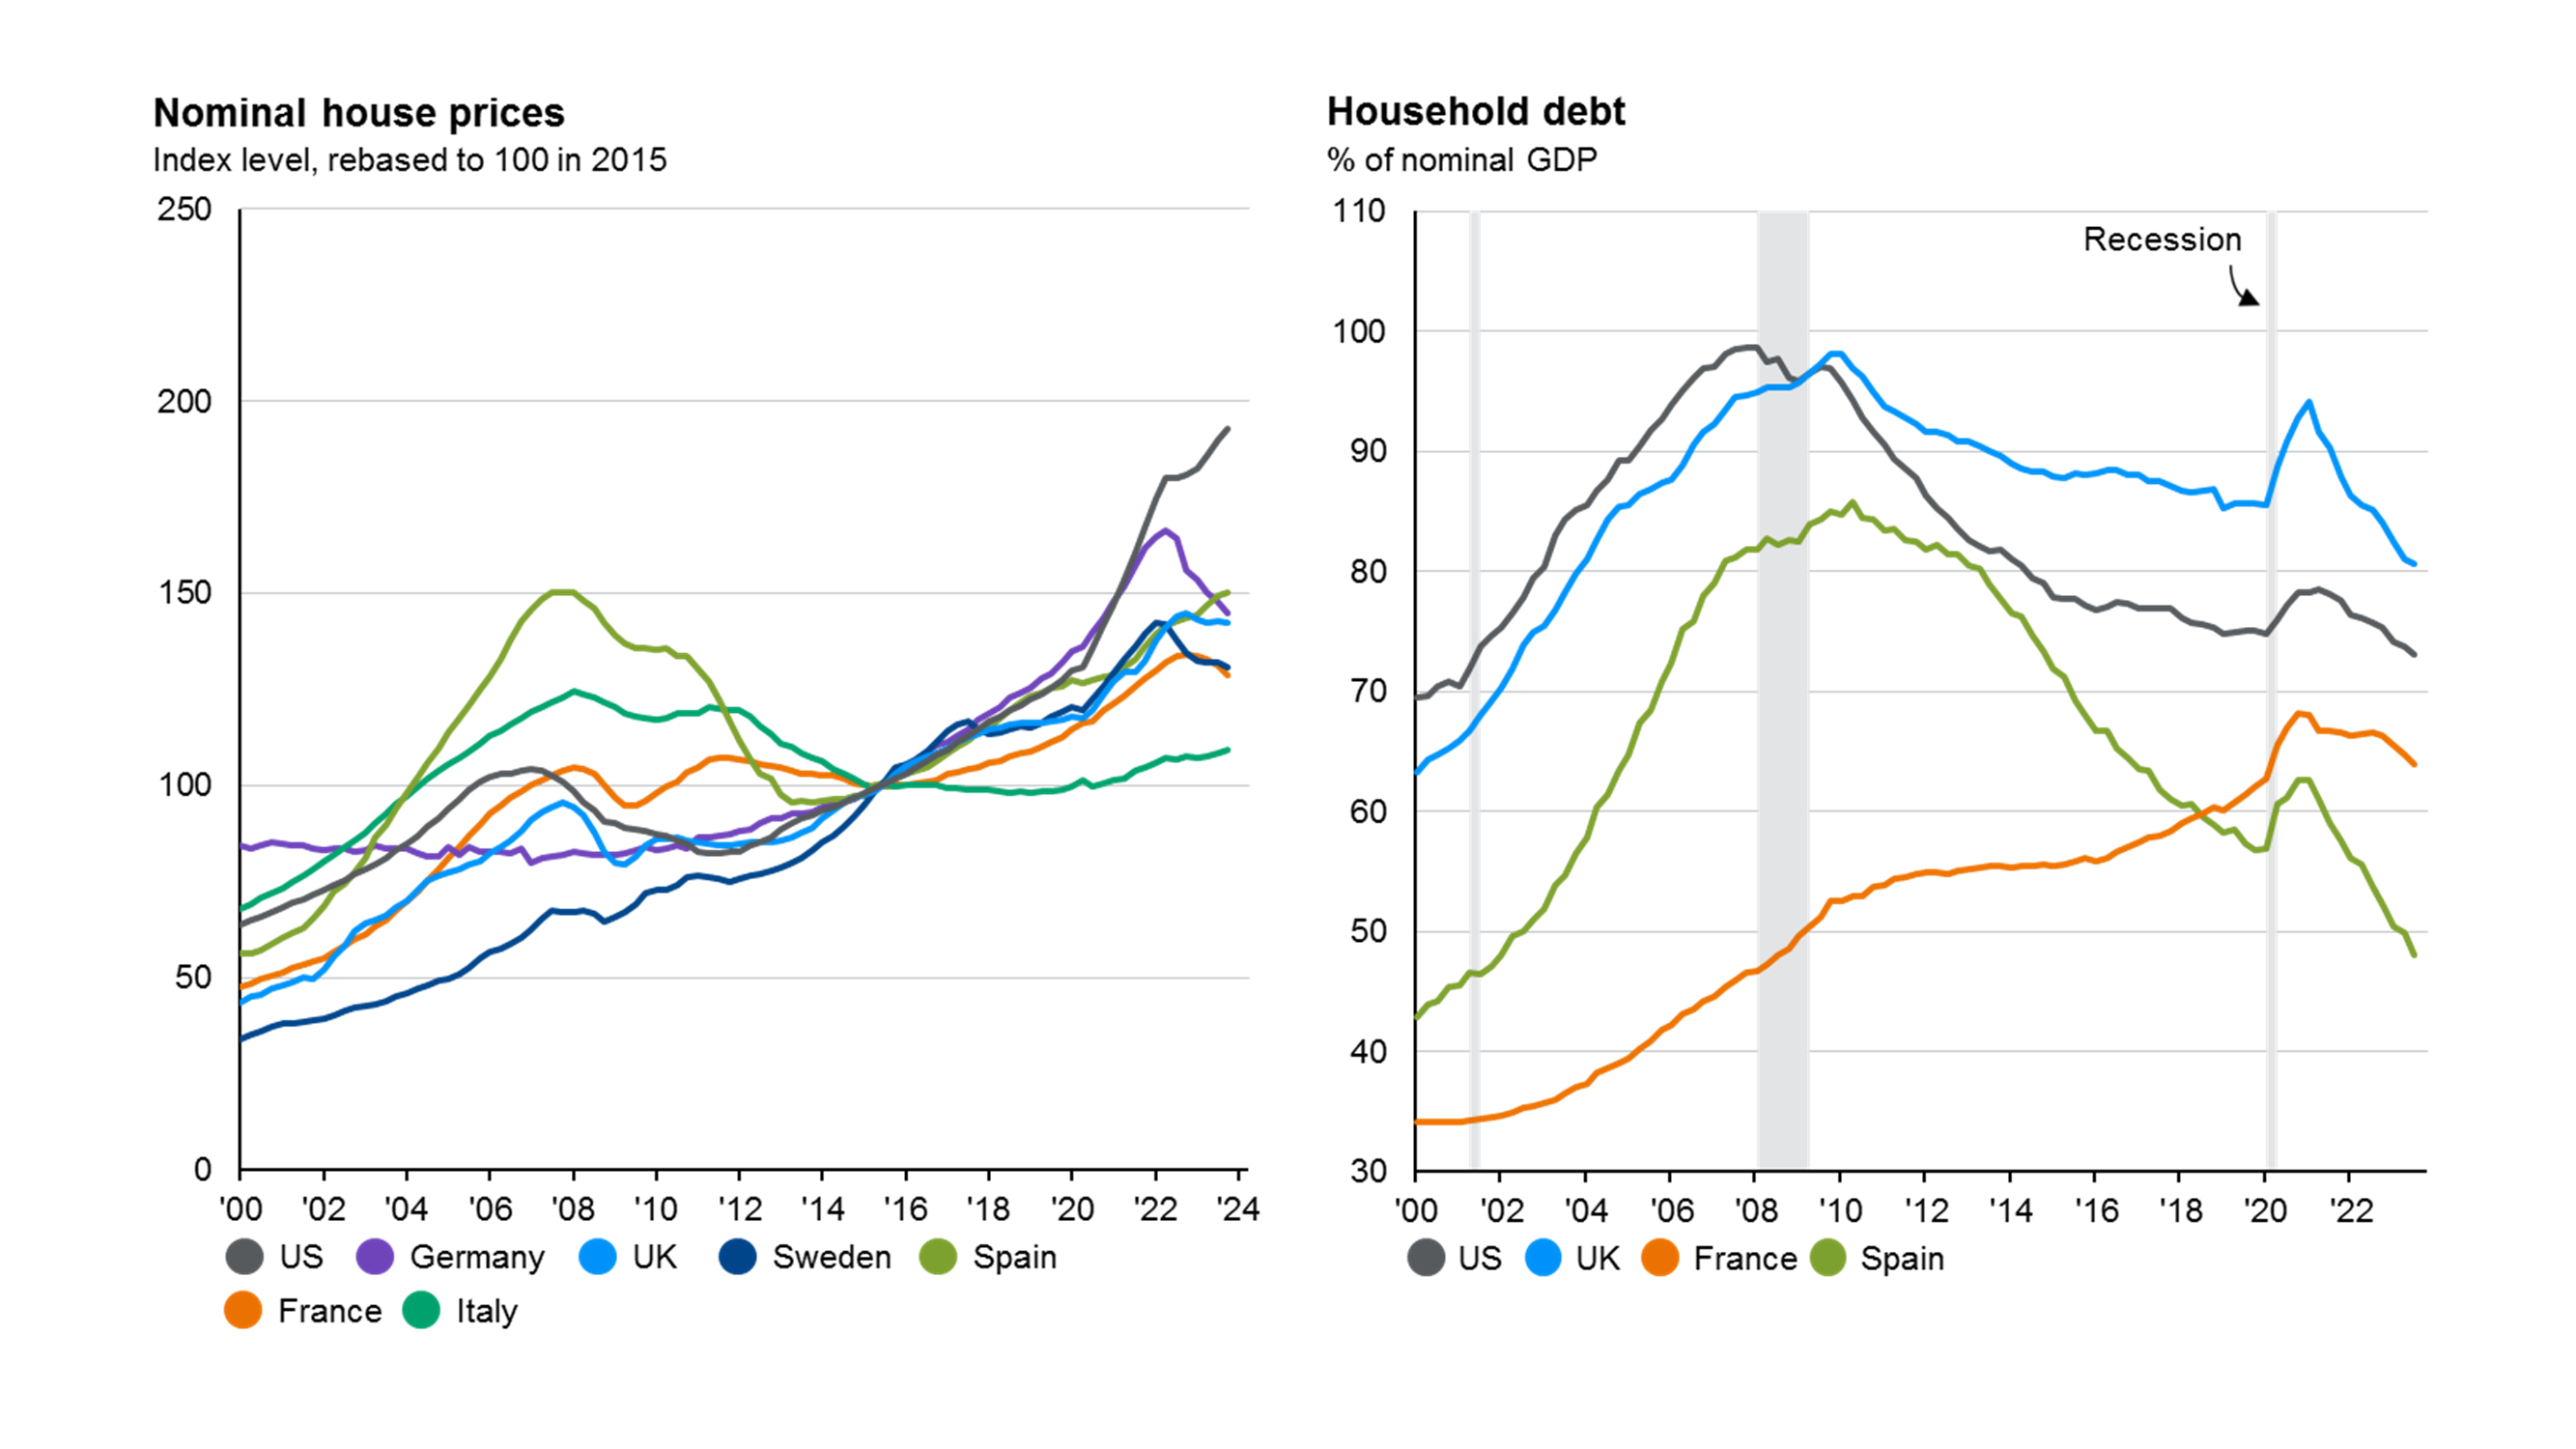 Household debt and construction investment